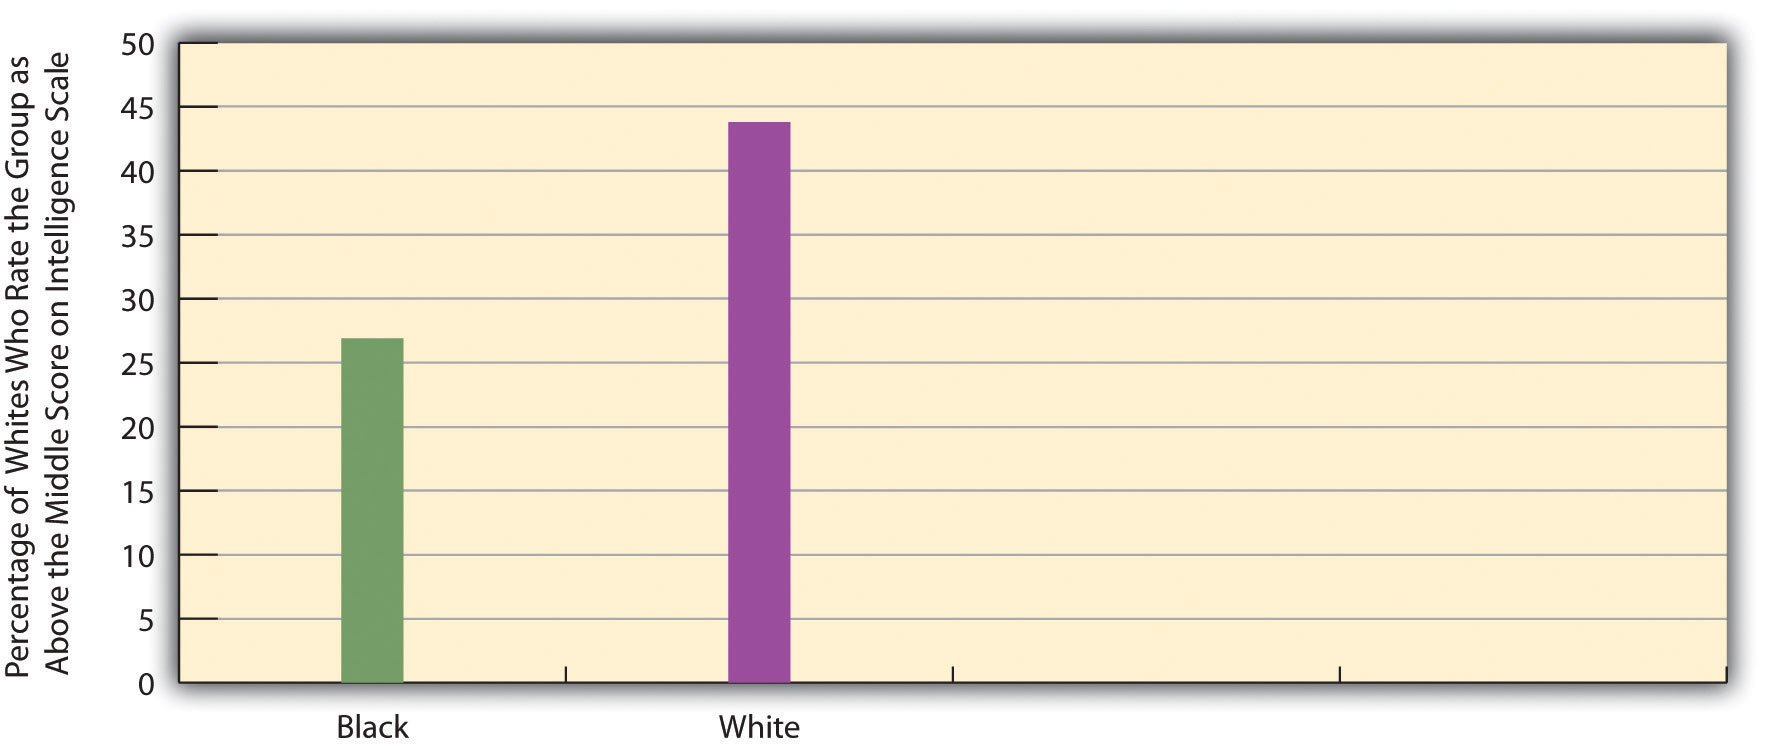 Chart showing that white respondents in the General Social Survey (GSS) are less likely to think Blacks are intelligent than they are to think whites are intelligent.